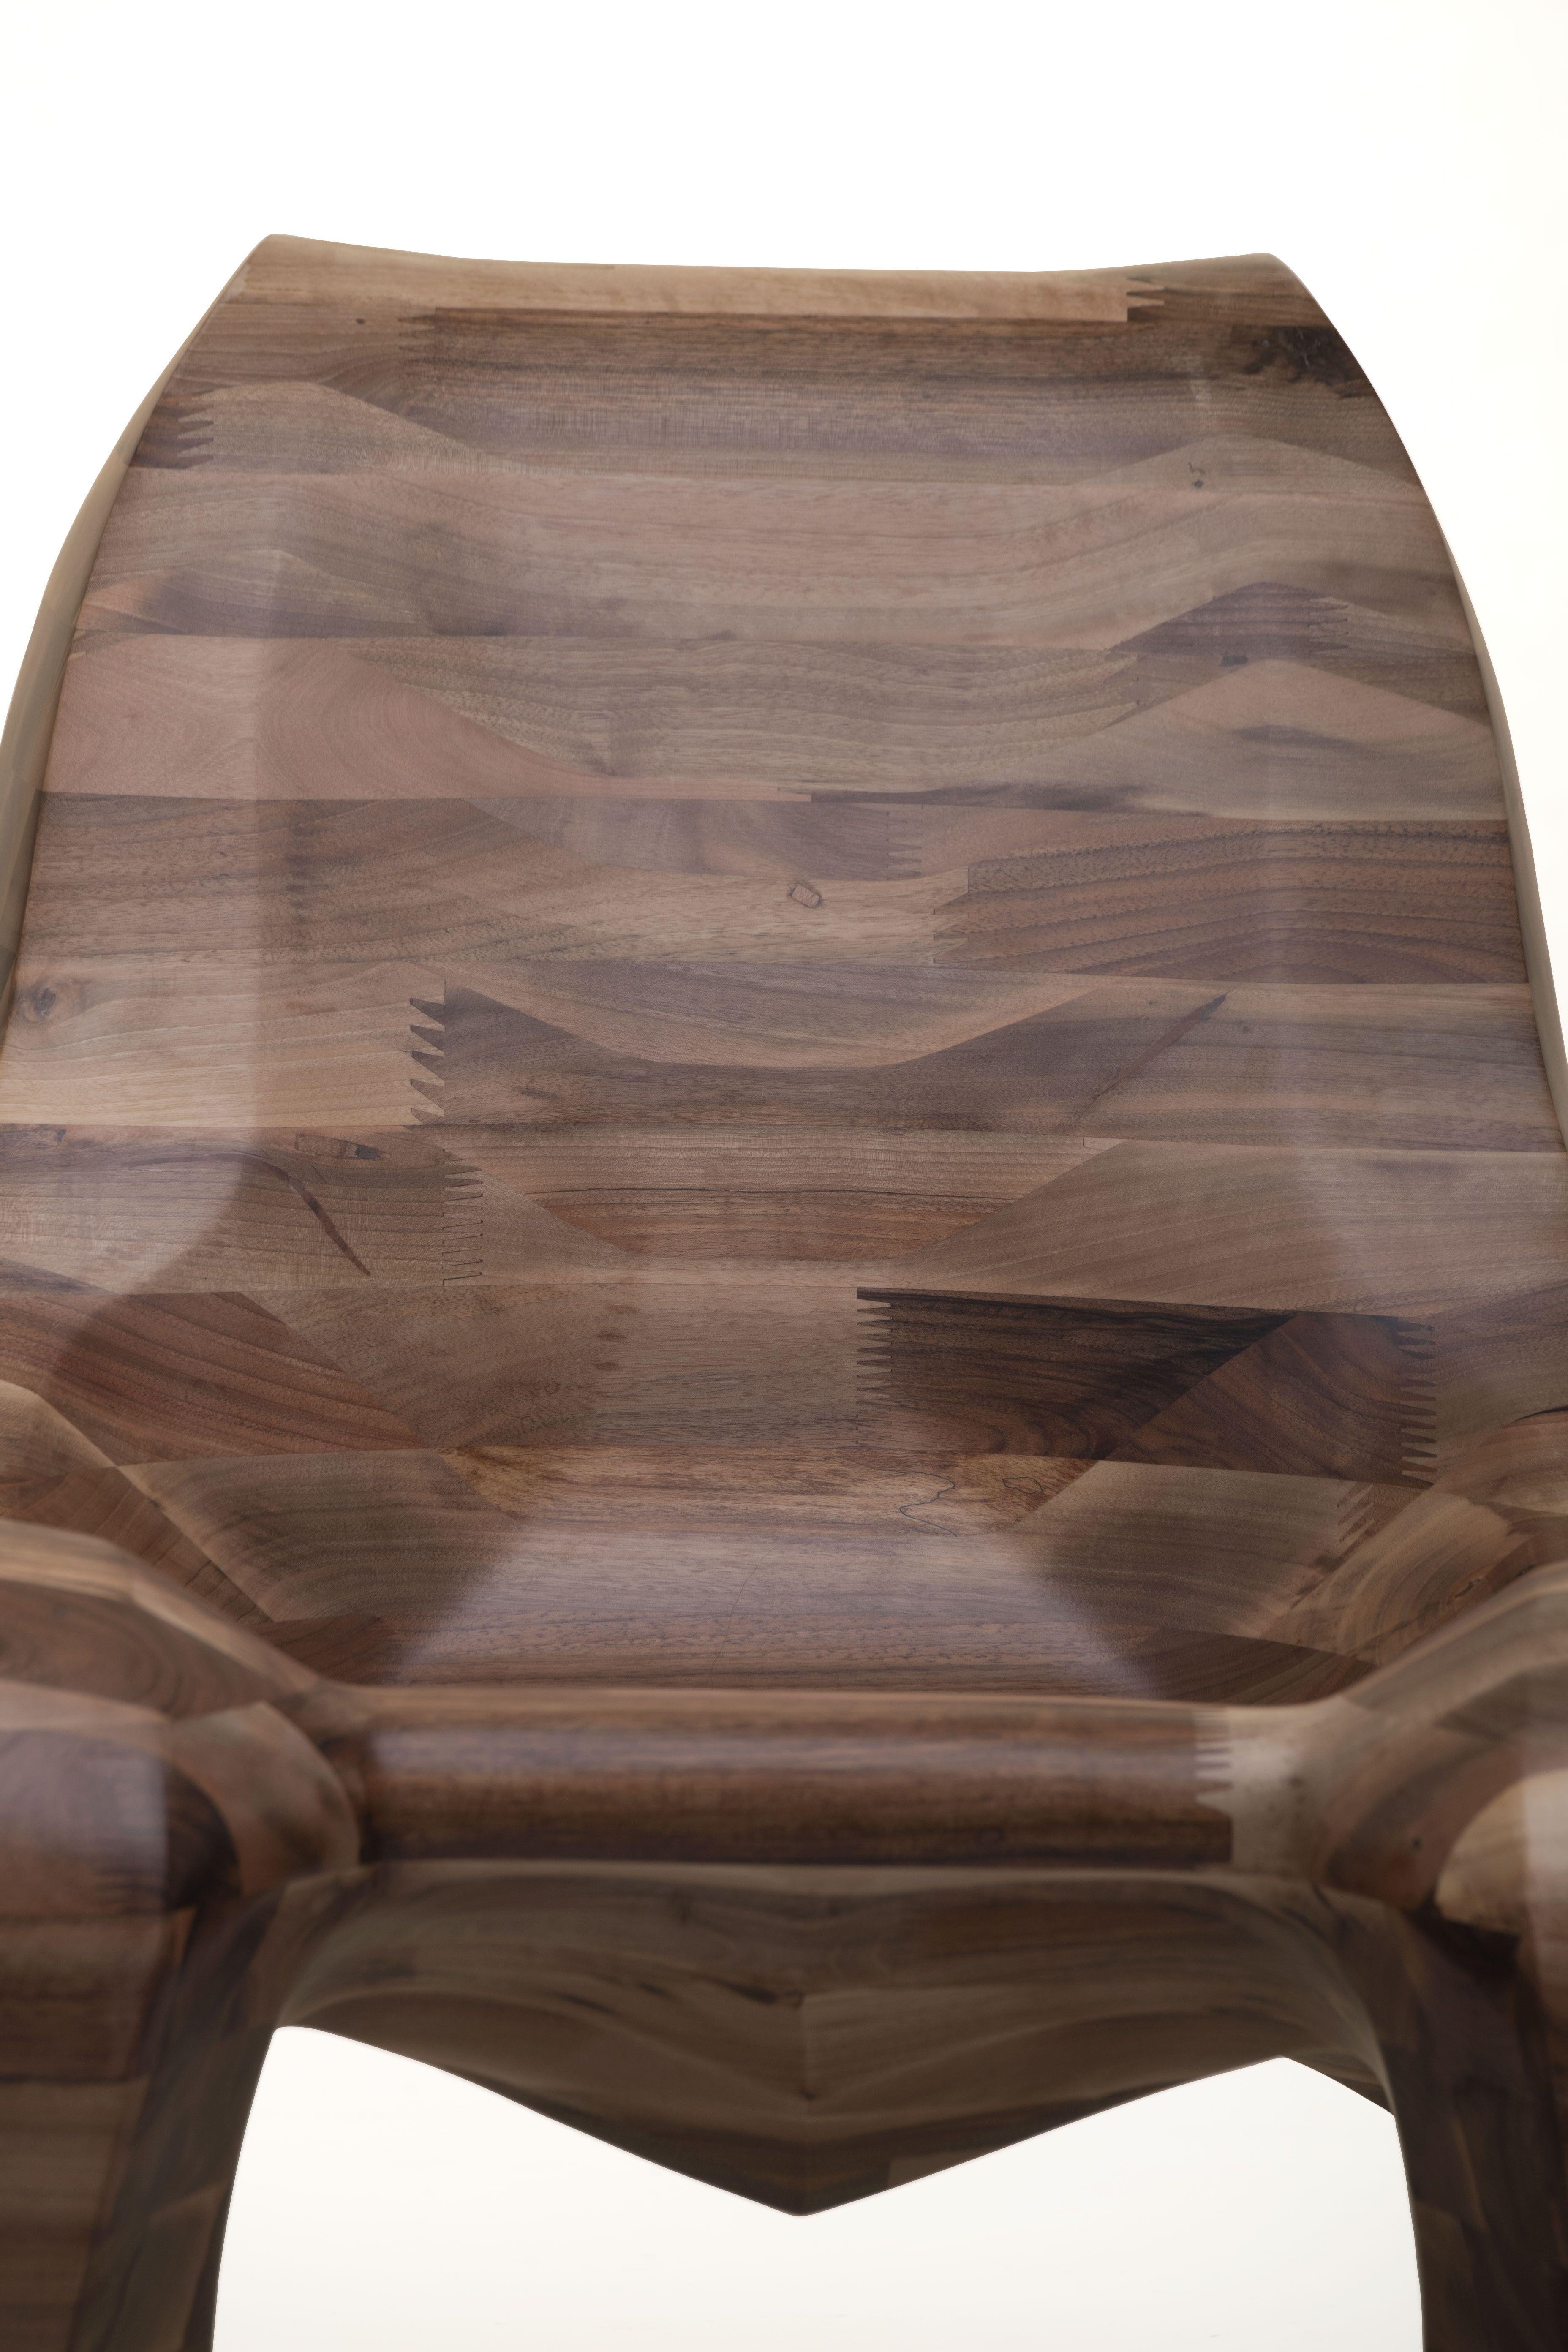 The Club 107 walnut by Max Jungblut is a timeless natural beauty, unique by its genuine material.
Solid Walnut beams with magnificent wood texture, softly follow the rounded form of this chair.
This ultimate seating is made in a 4-axel CNC